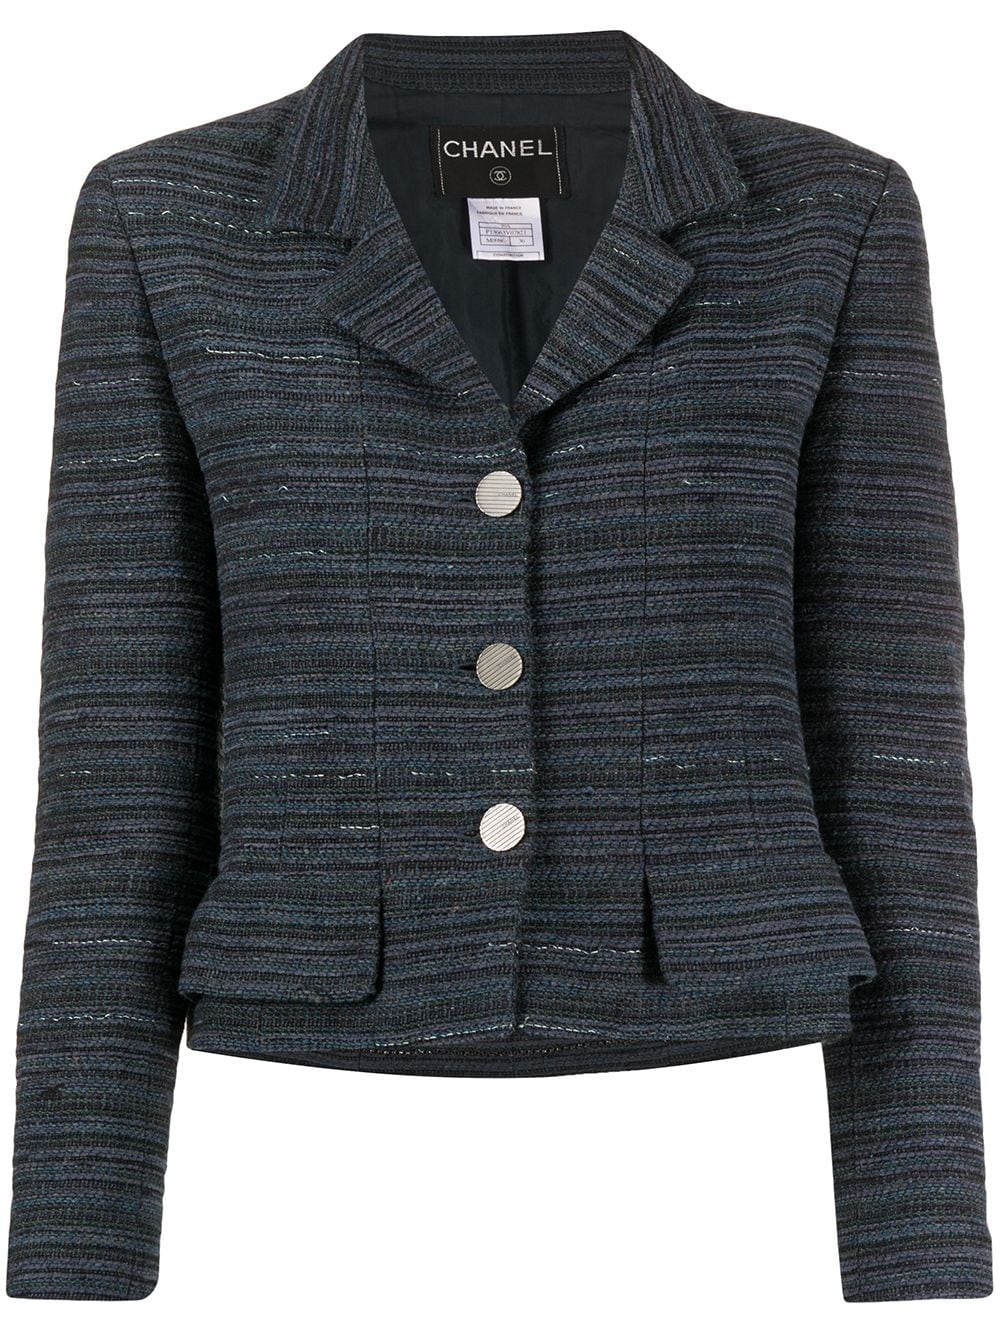 CHANEL Pre-Owned 1996 Cropped Tweed Jacket - Farfetch